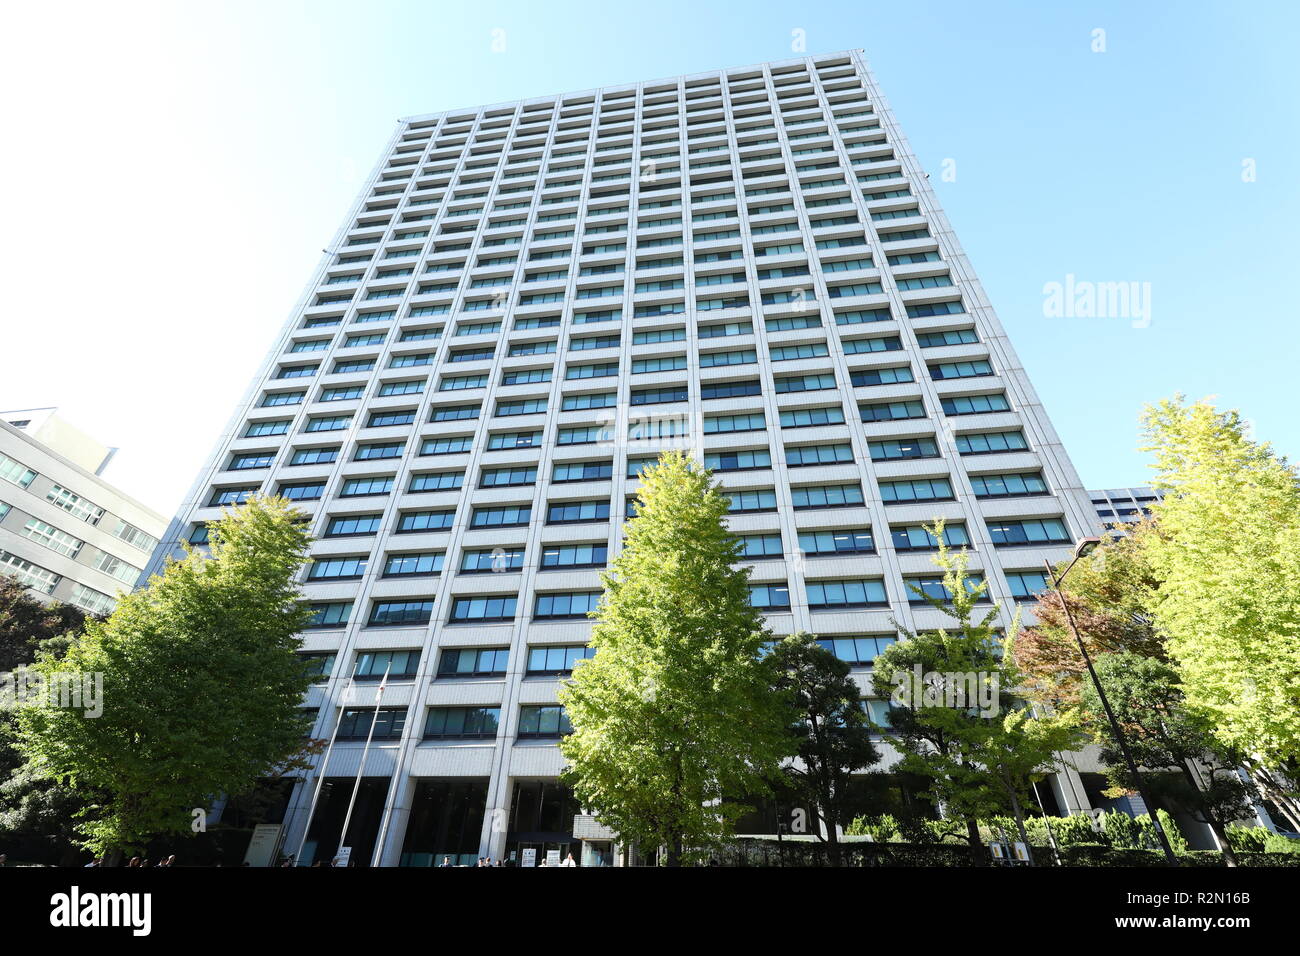 A General View Of The Central Government Building No 5 Main Building Housing The Ministry Of Health Labour And Welfare The Ministry Of The Environment In Tokyo On November 15 2018 Japan Credit